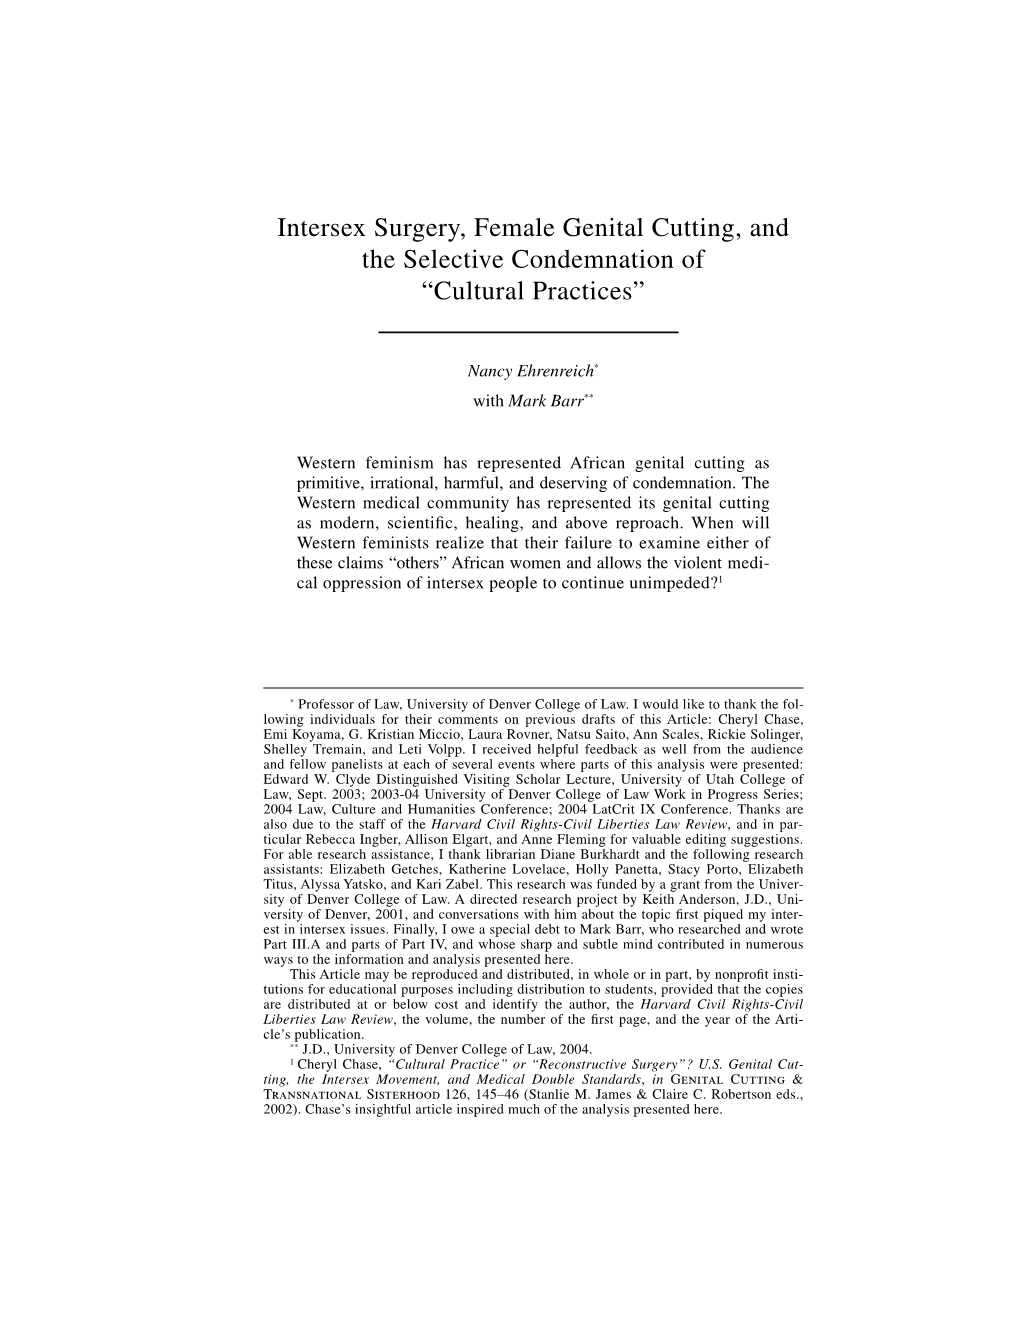 Intersex Surgery, Female Genital Cutting, and the Selective Condemnation of “Cultural Practices”